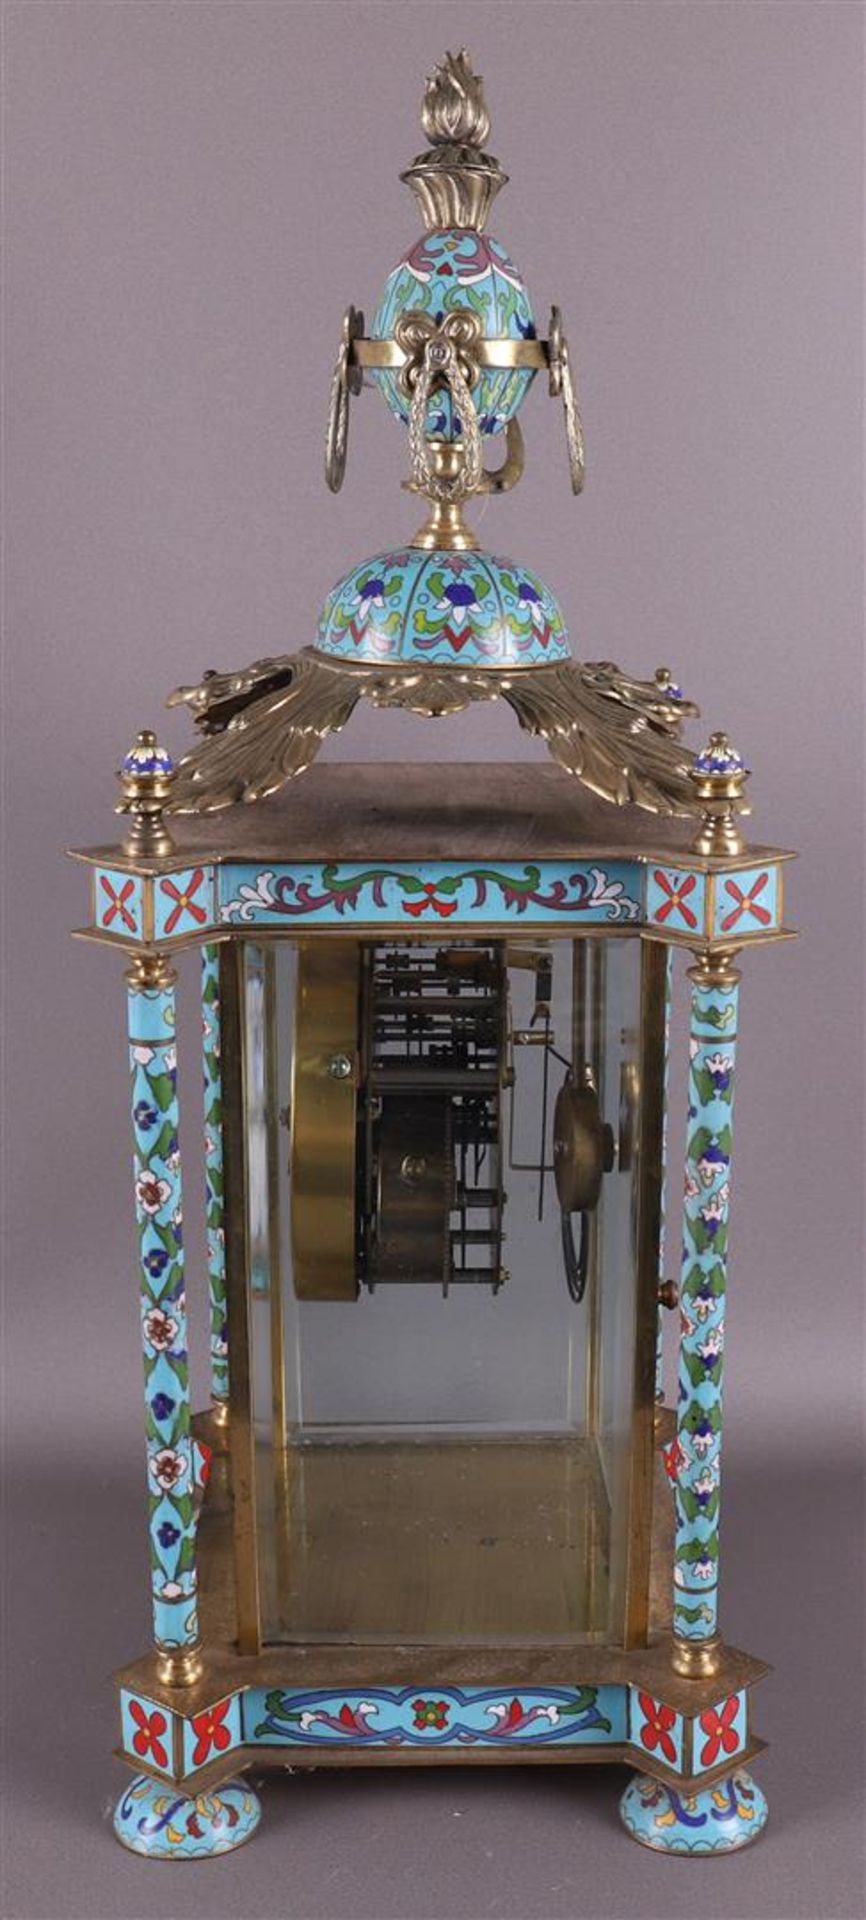 A table mantel clock in cloissonné and brass casing, 20th century. - Image 3 of 6